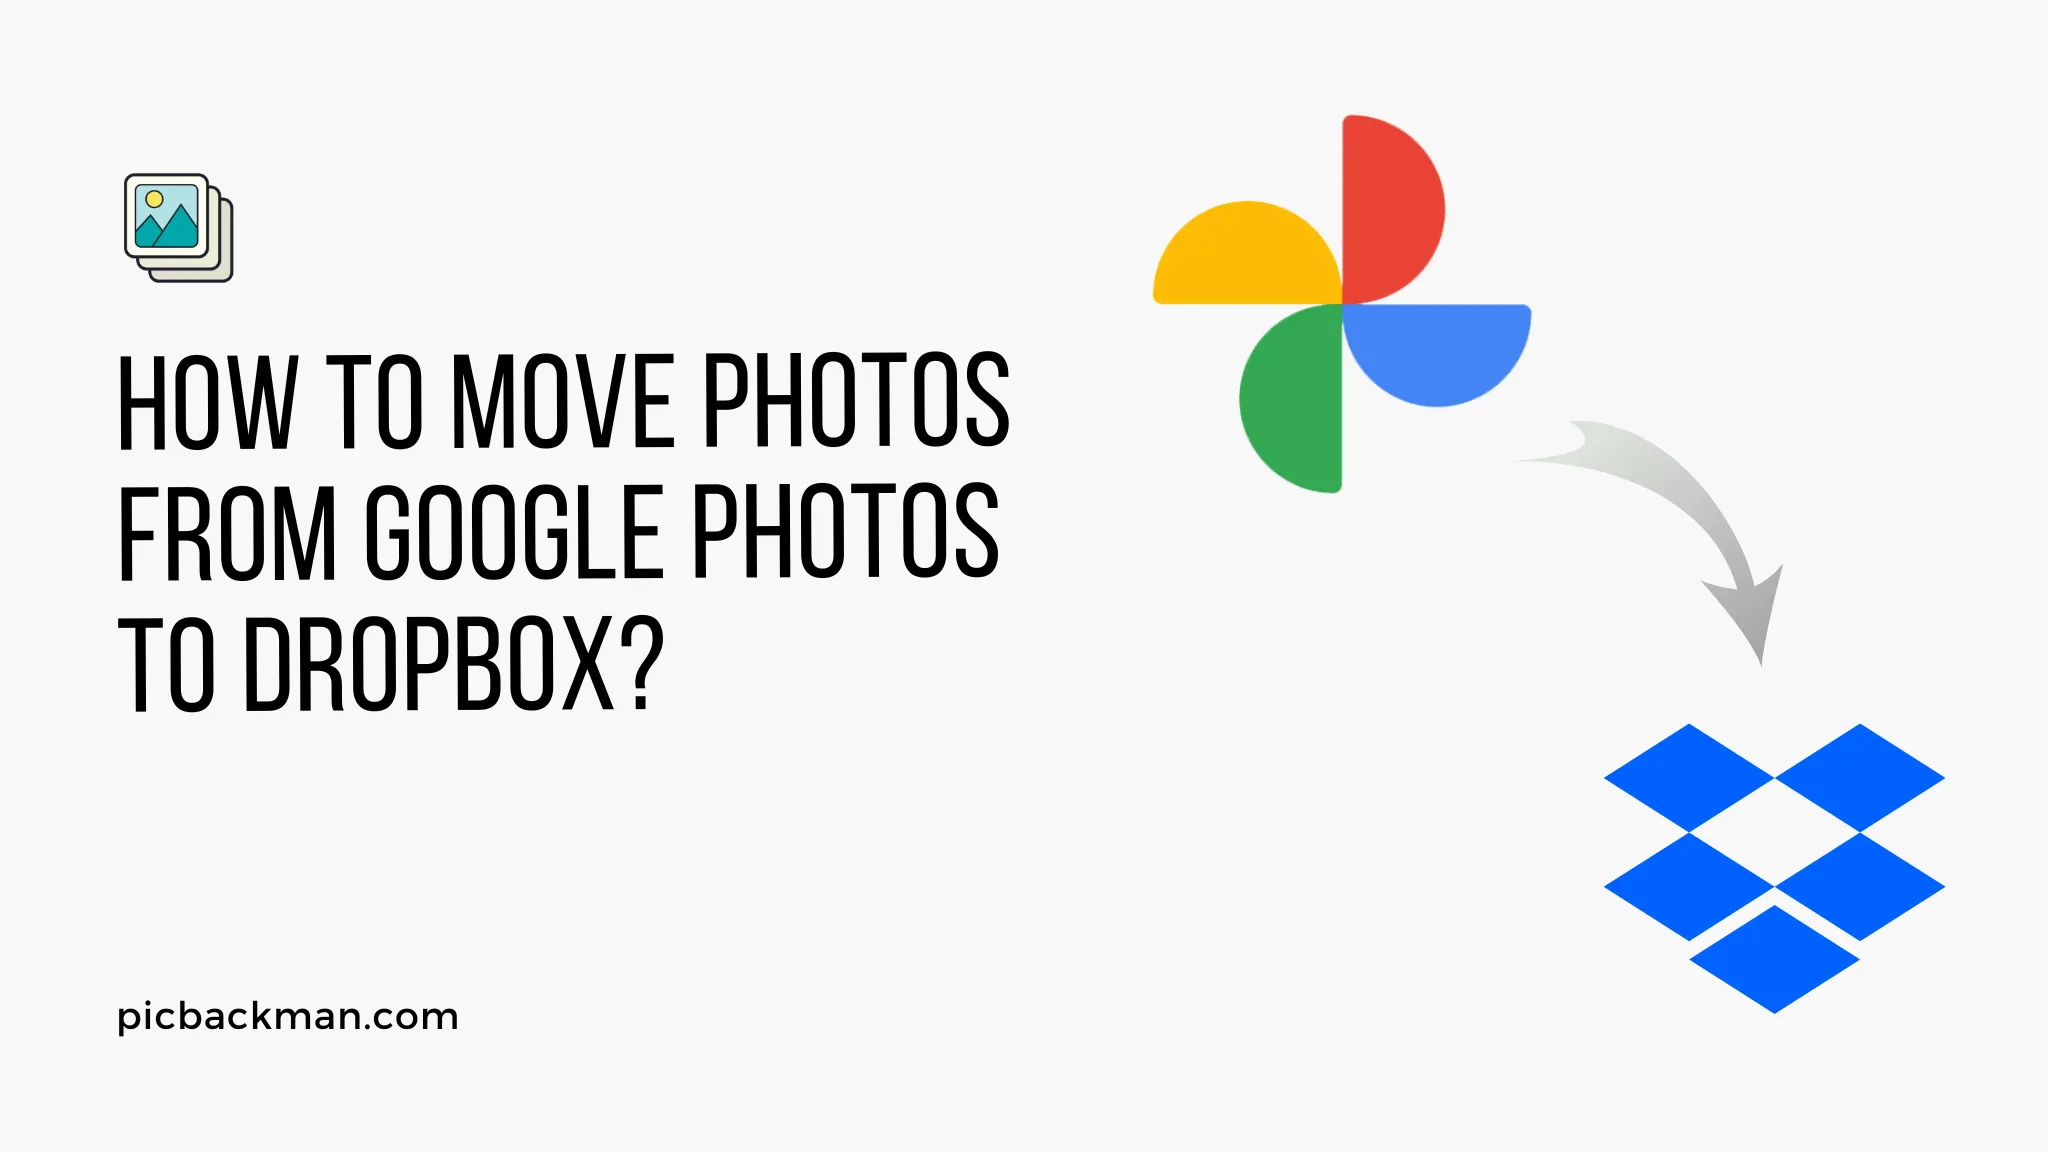 How to Move Photos from Google Photos to Dropbox?